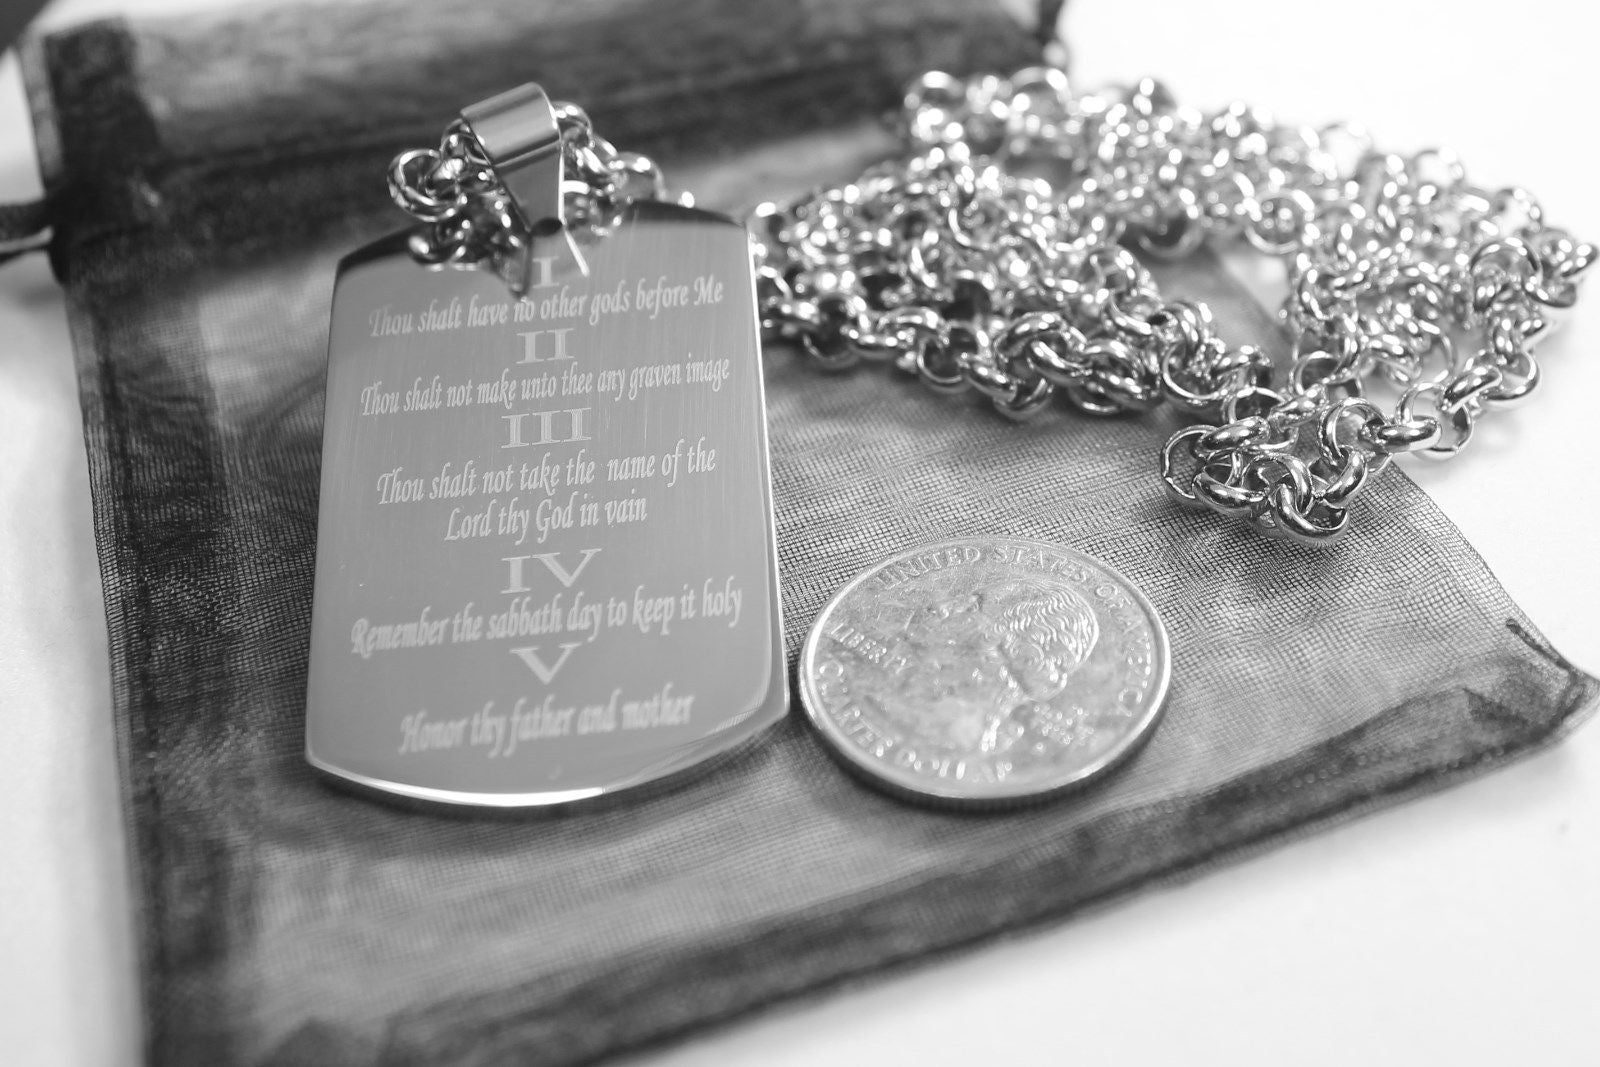 10 COMMANDMENTS SOLID THICK  STAINLESS STEEL ROLO CHAIN SHINE  PRAYER - Samstagsandmore